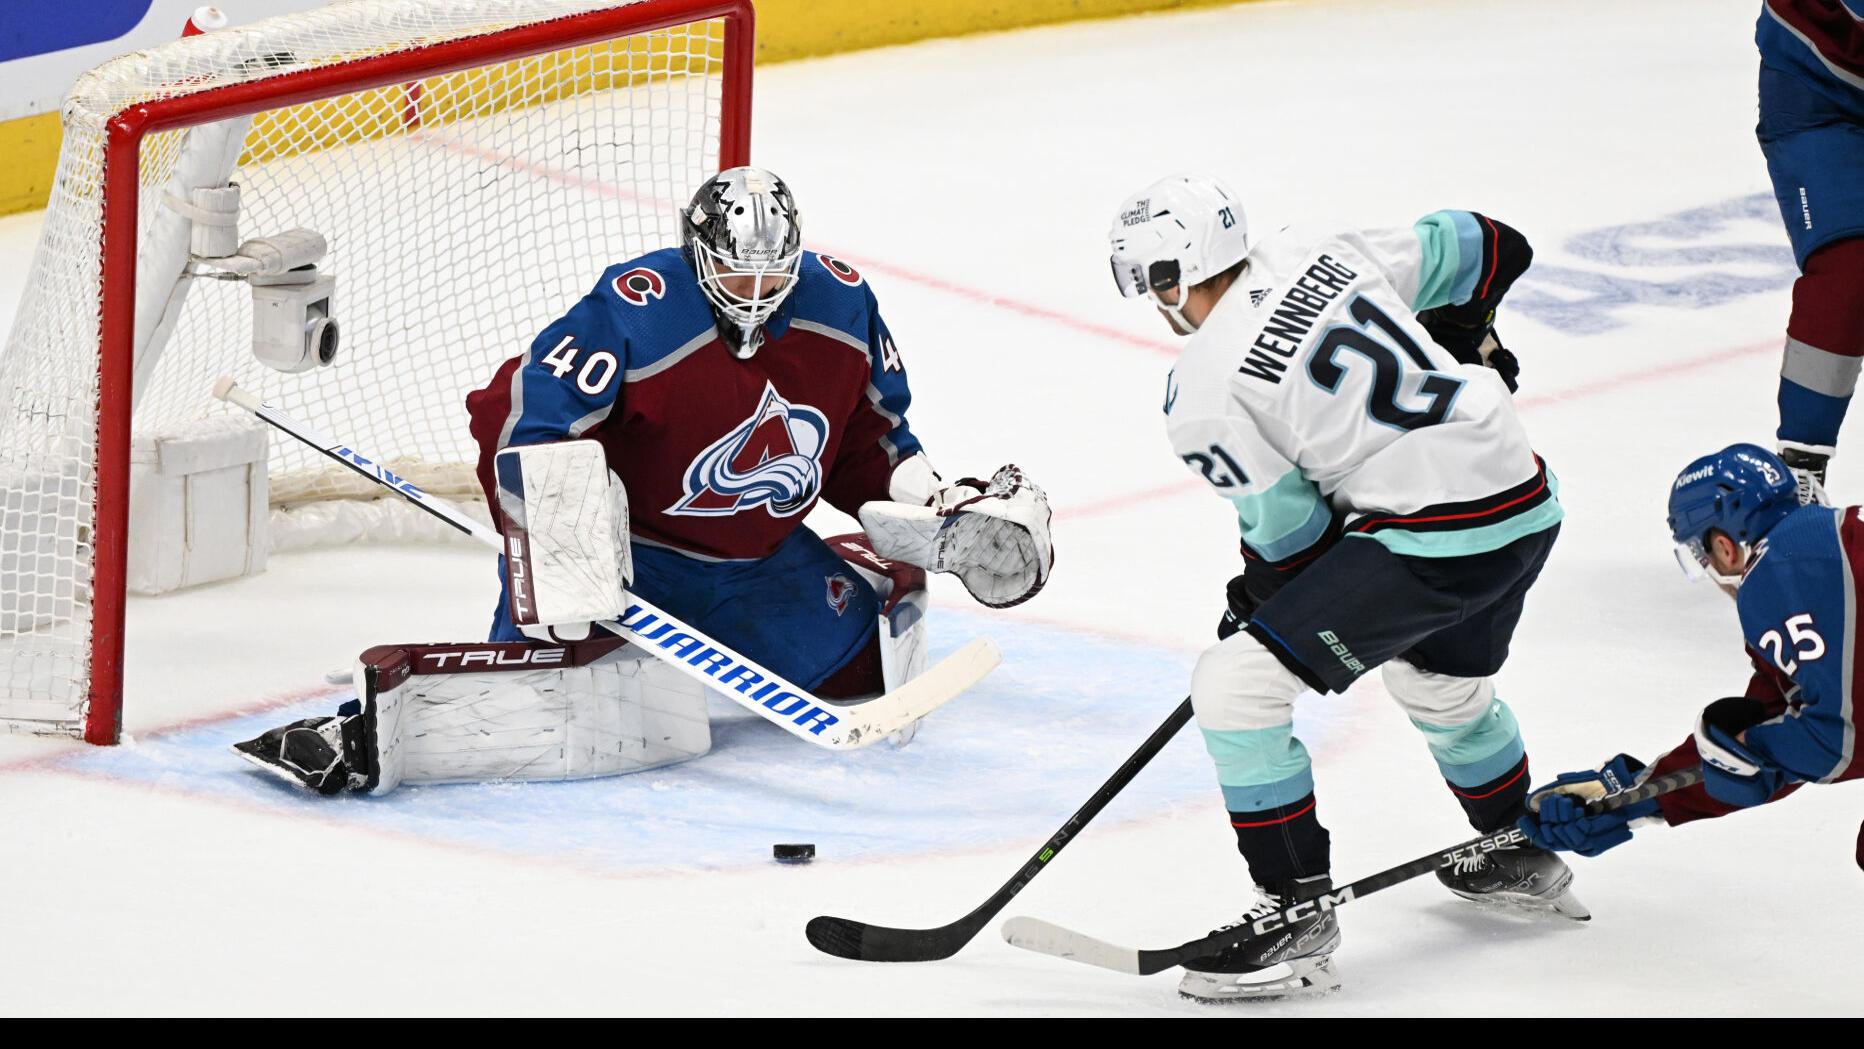 Paul Klee: What a show! With Game 2 win Philipp Grubauer proves he's  long-term goalie answer for the Avalanche, Denver-gazette